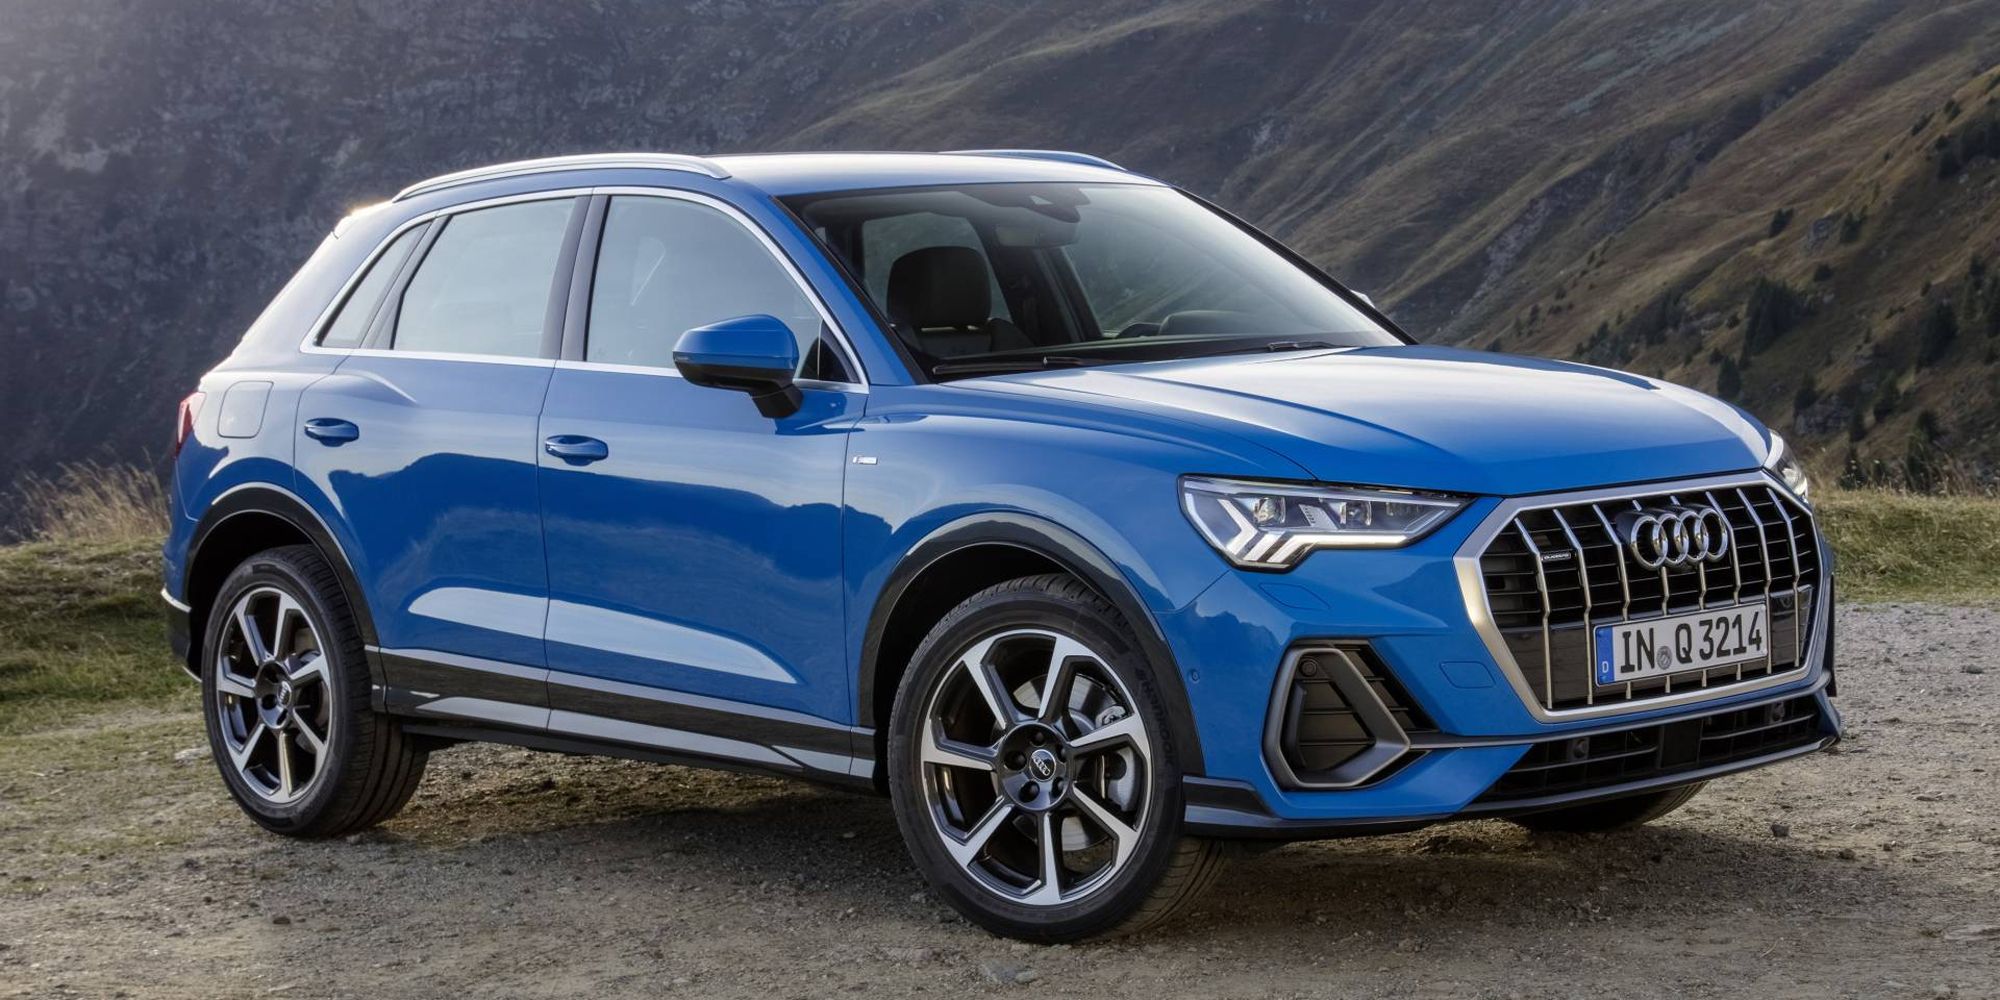 The facelifted Q3 in blue